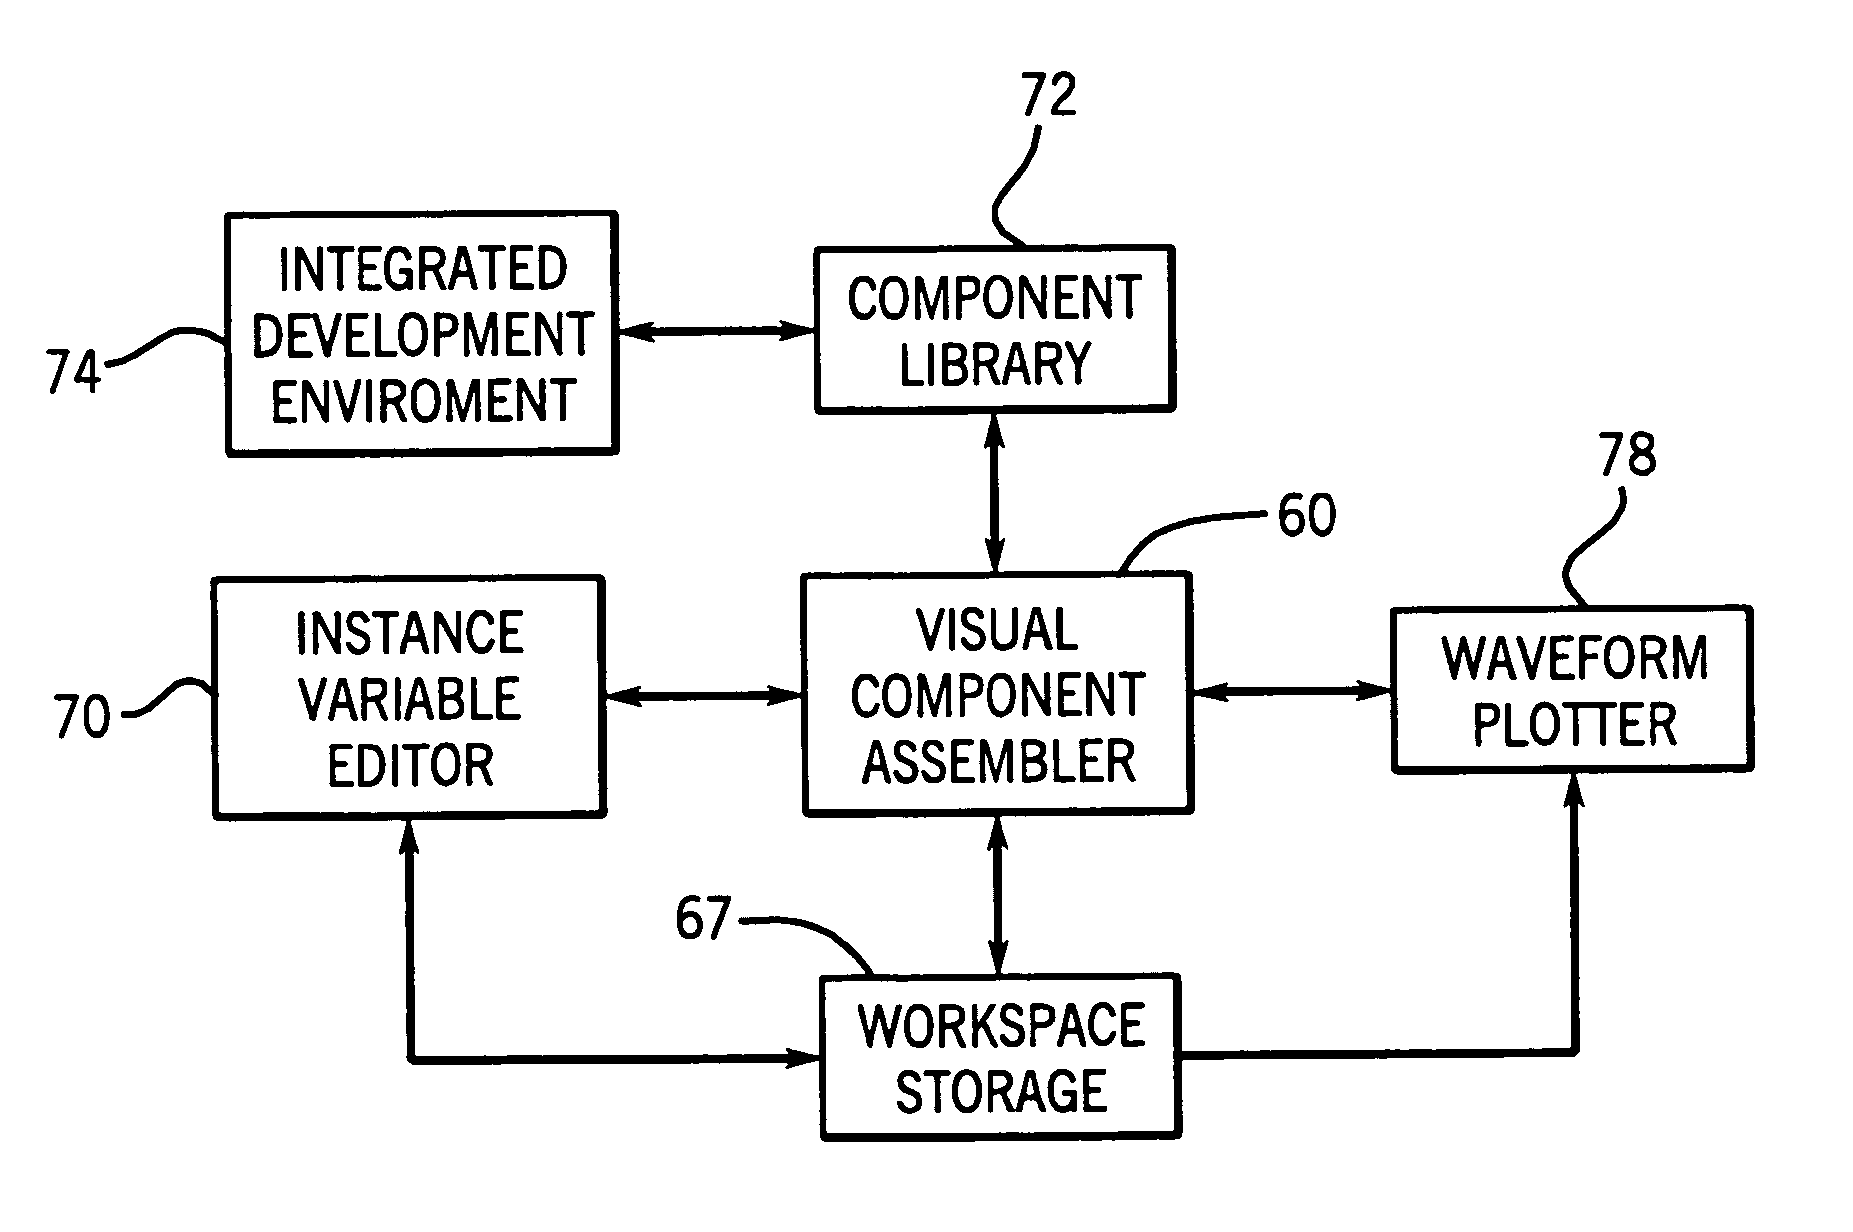 Graphic application development system for a medical imaging system